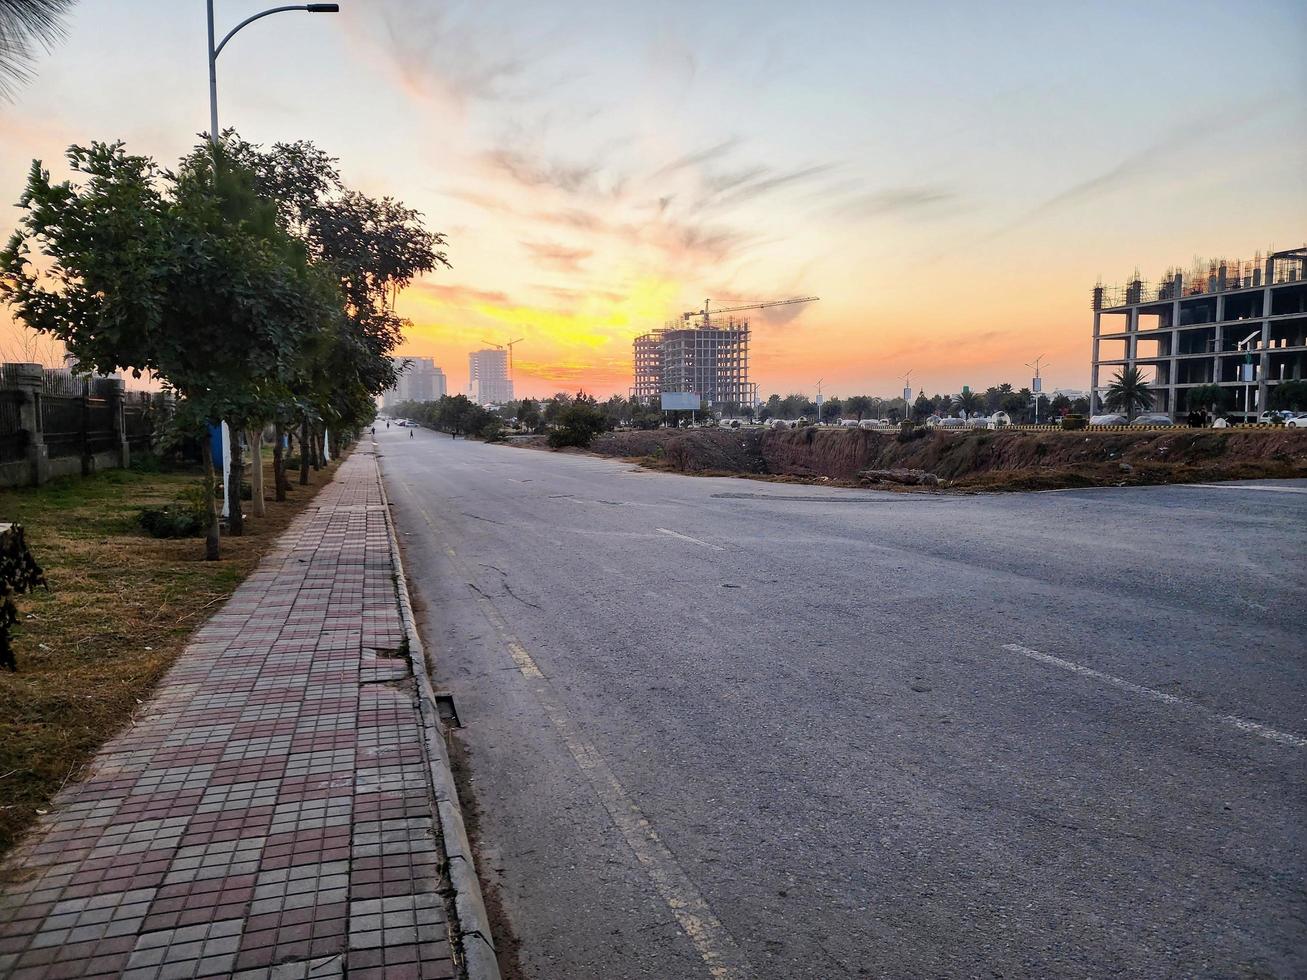 Sun Set Time with Buildings And Road View photo